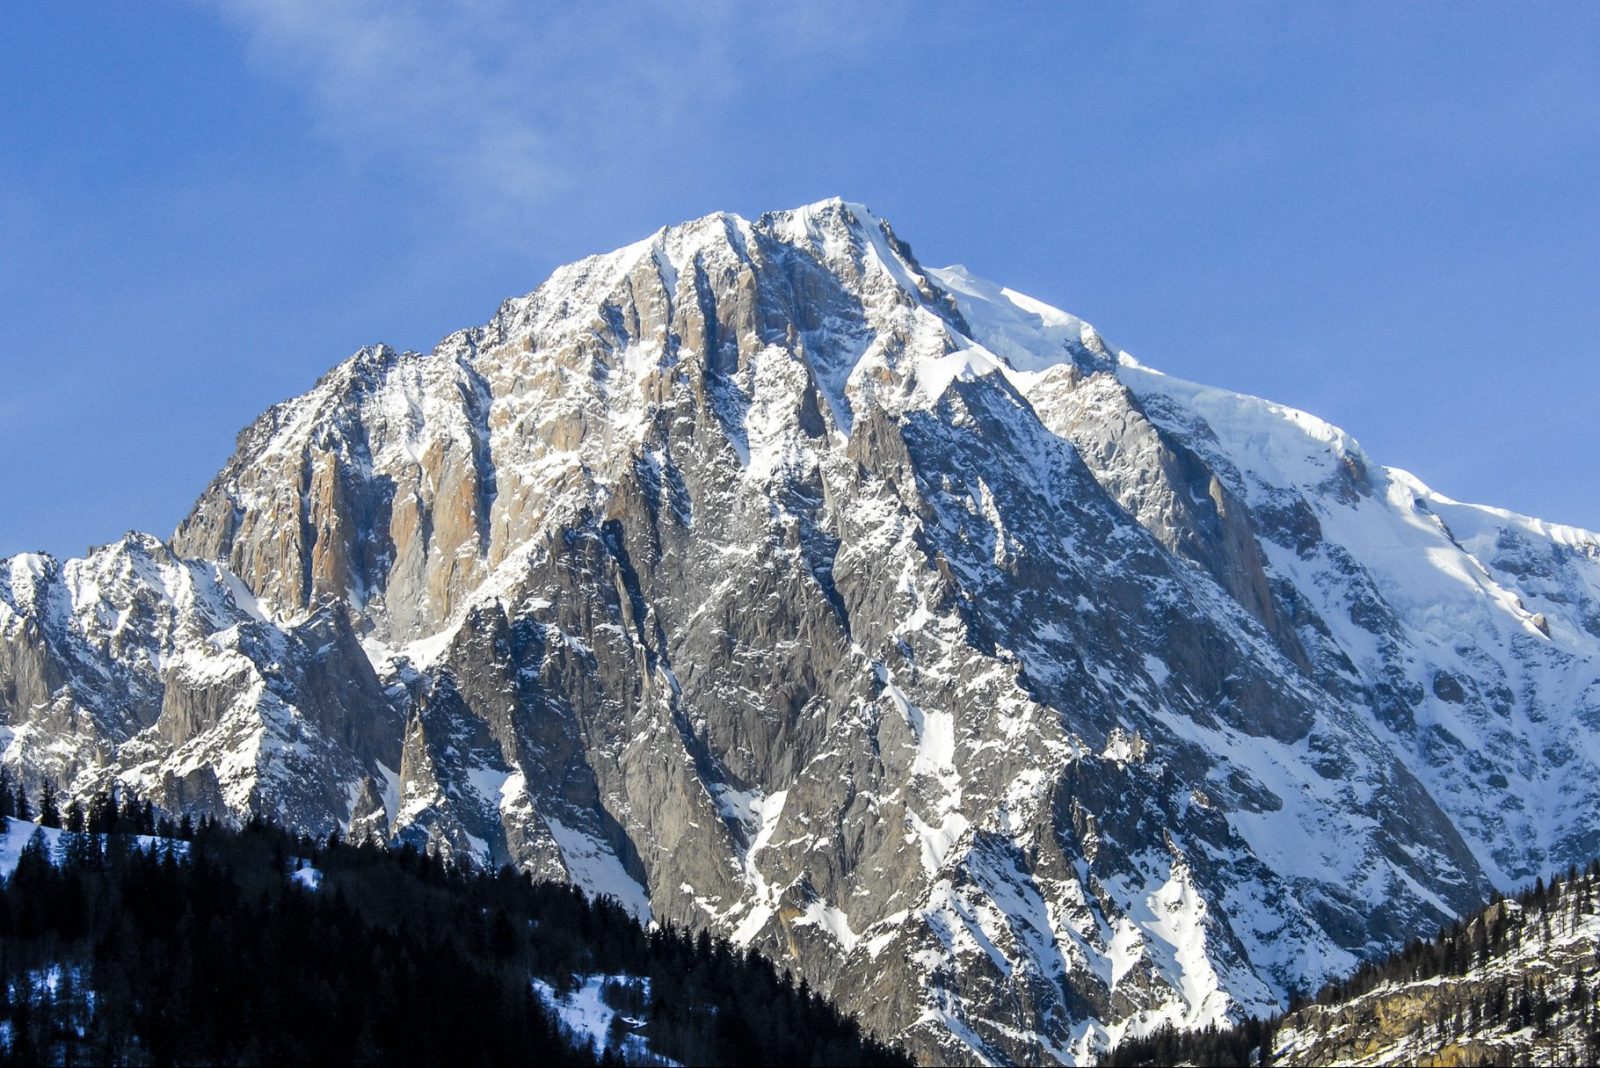 Here Are 24 Glorious Natural Attractions – Can You Match Them to Their Country? Mont Blanc mountain